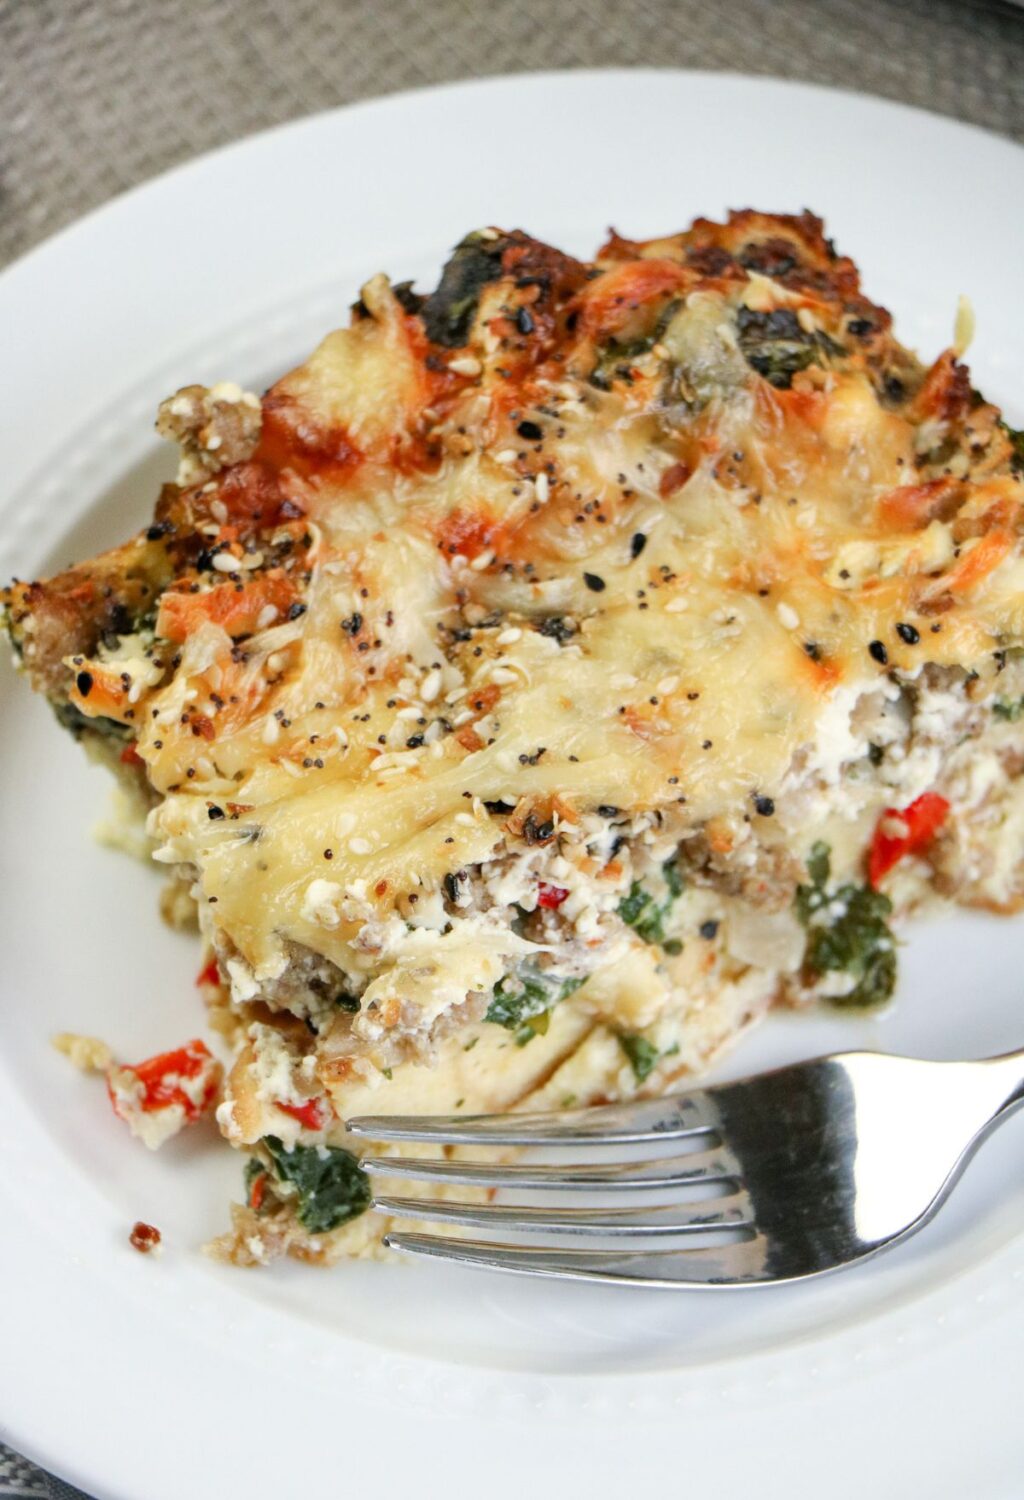 A slice of breakfast casserole on a plate with a fork.